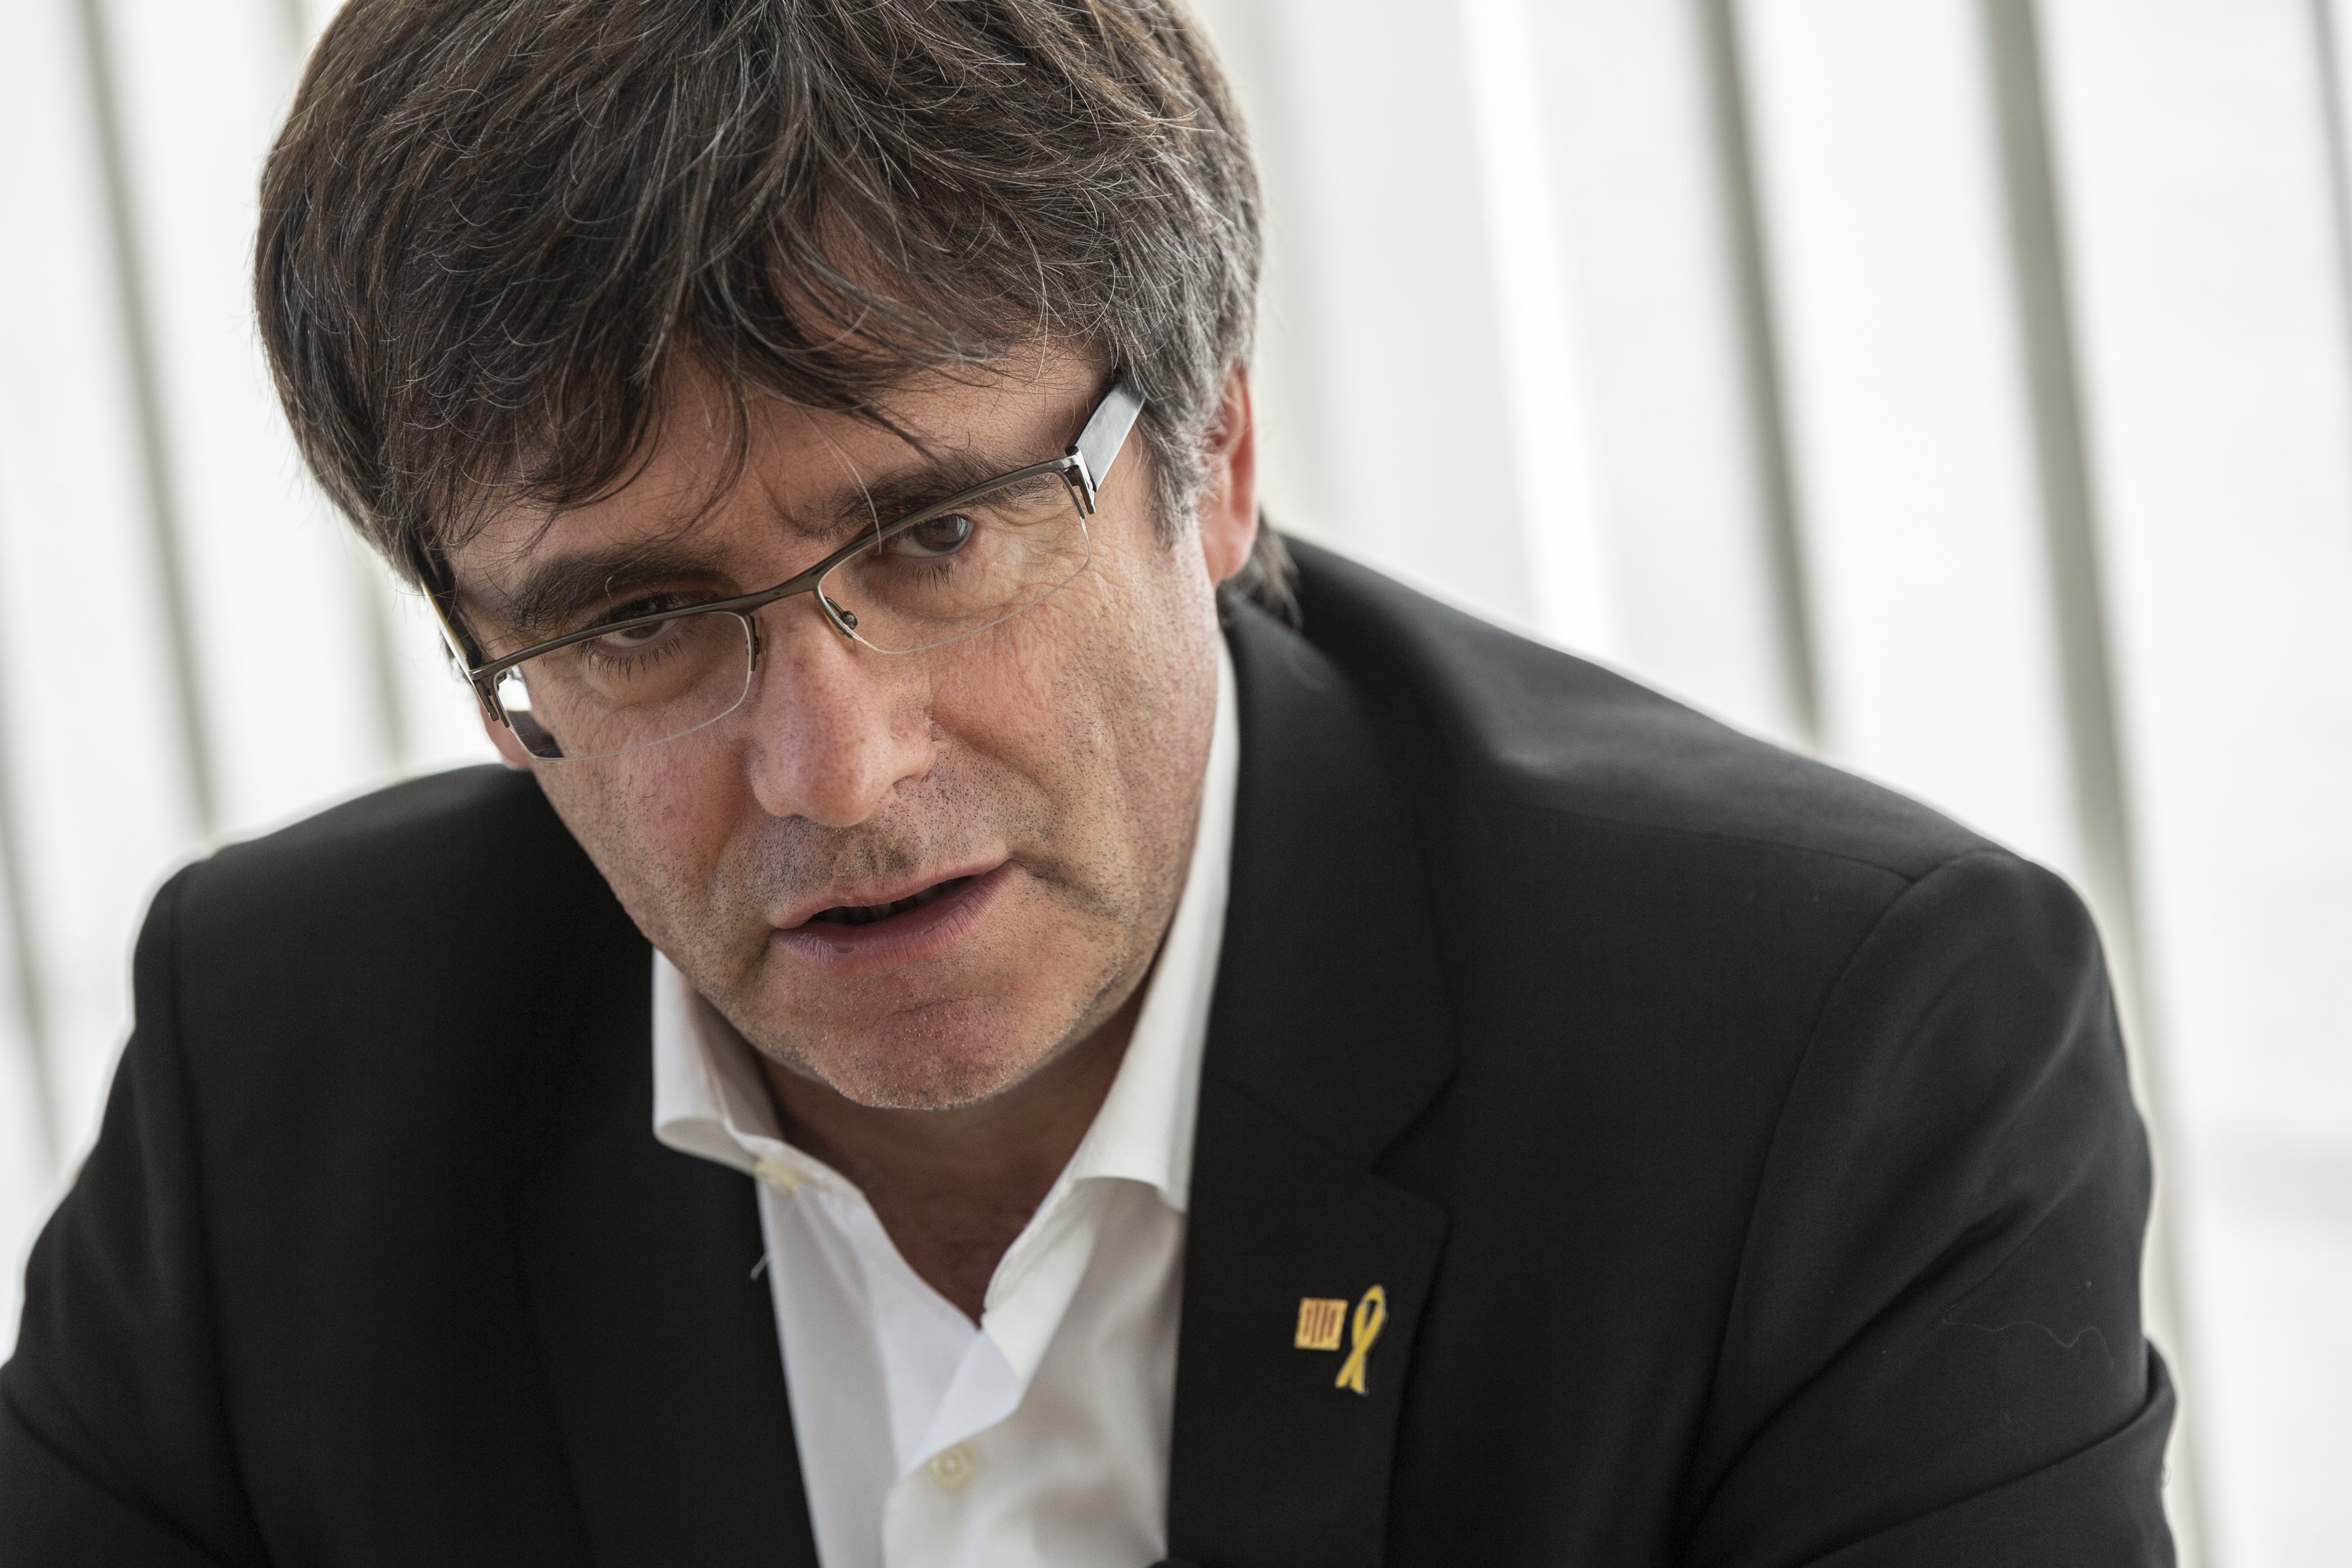 Puigdemont, to 'AP': The trial "will not be an act of justice but rather one of vengeance"